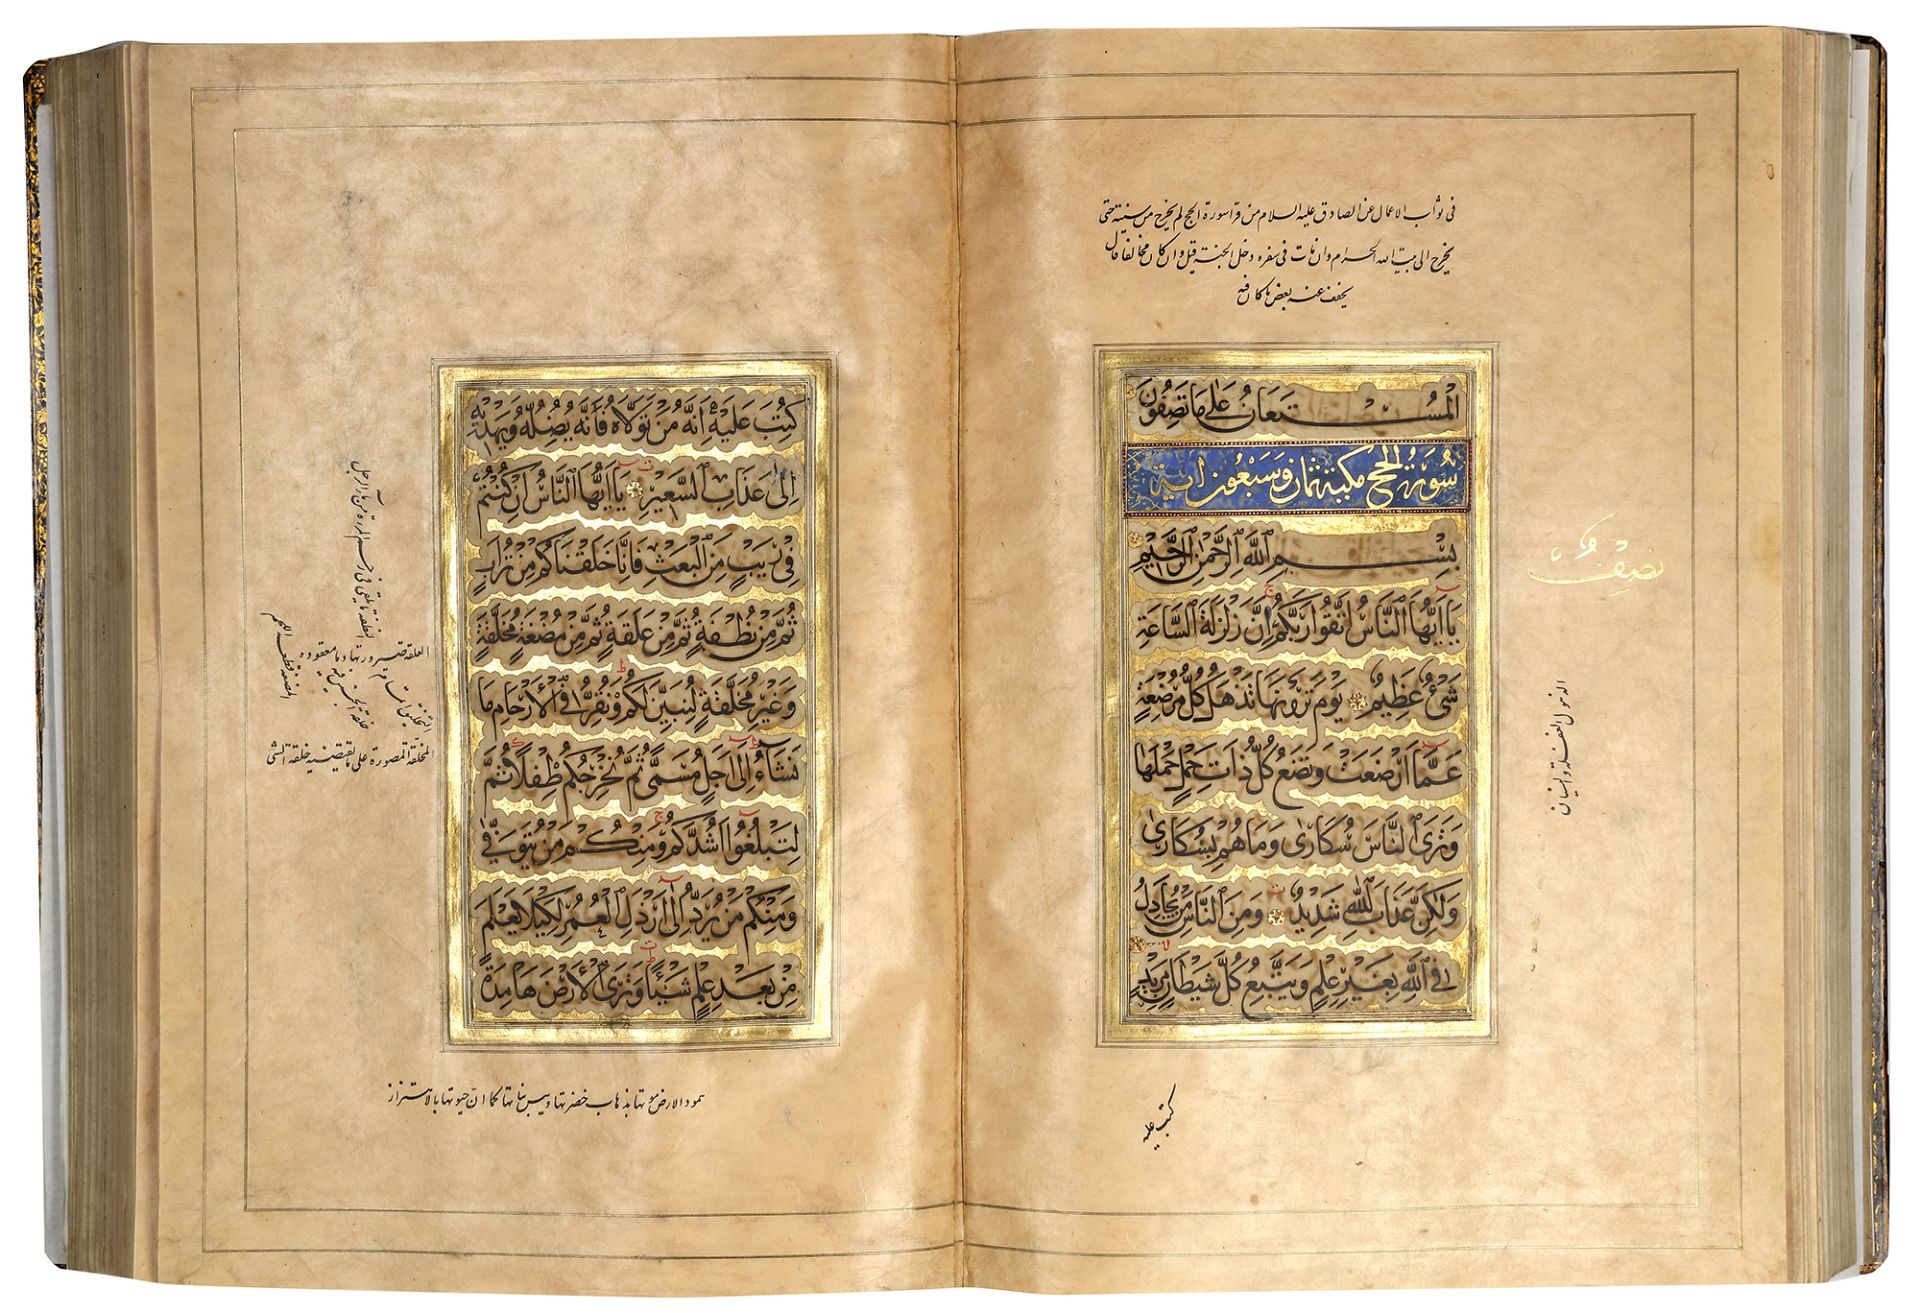 AN EXCEPTIONAL ILLUMINATED SAFAVID QURAN (POSSIBLY SHIRAZ), SECOND HALF 16TH CENTURY, WITH AN ADDITI - Image 11 of 14